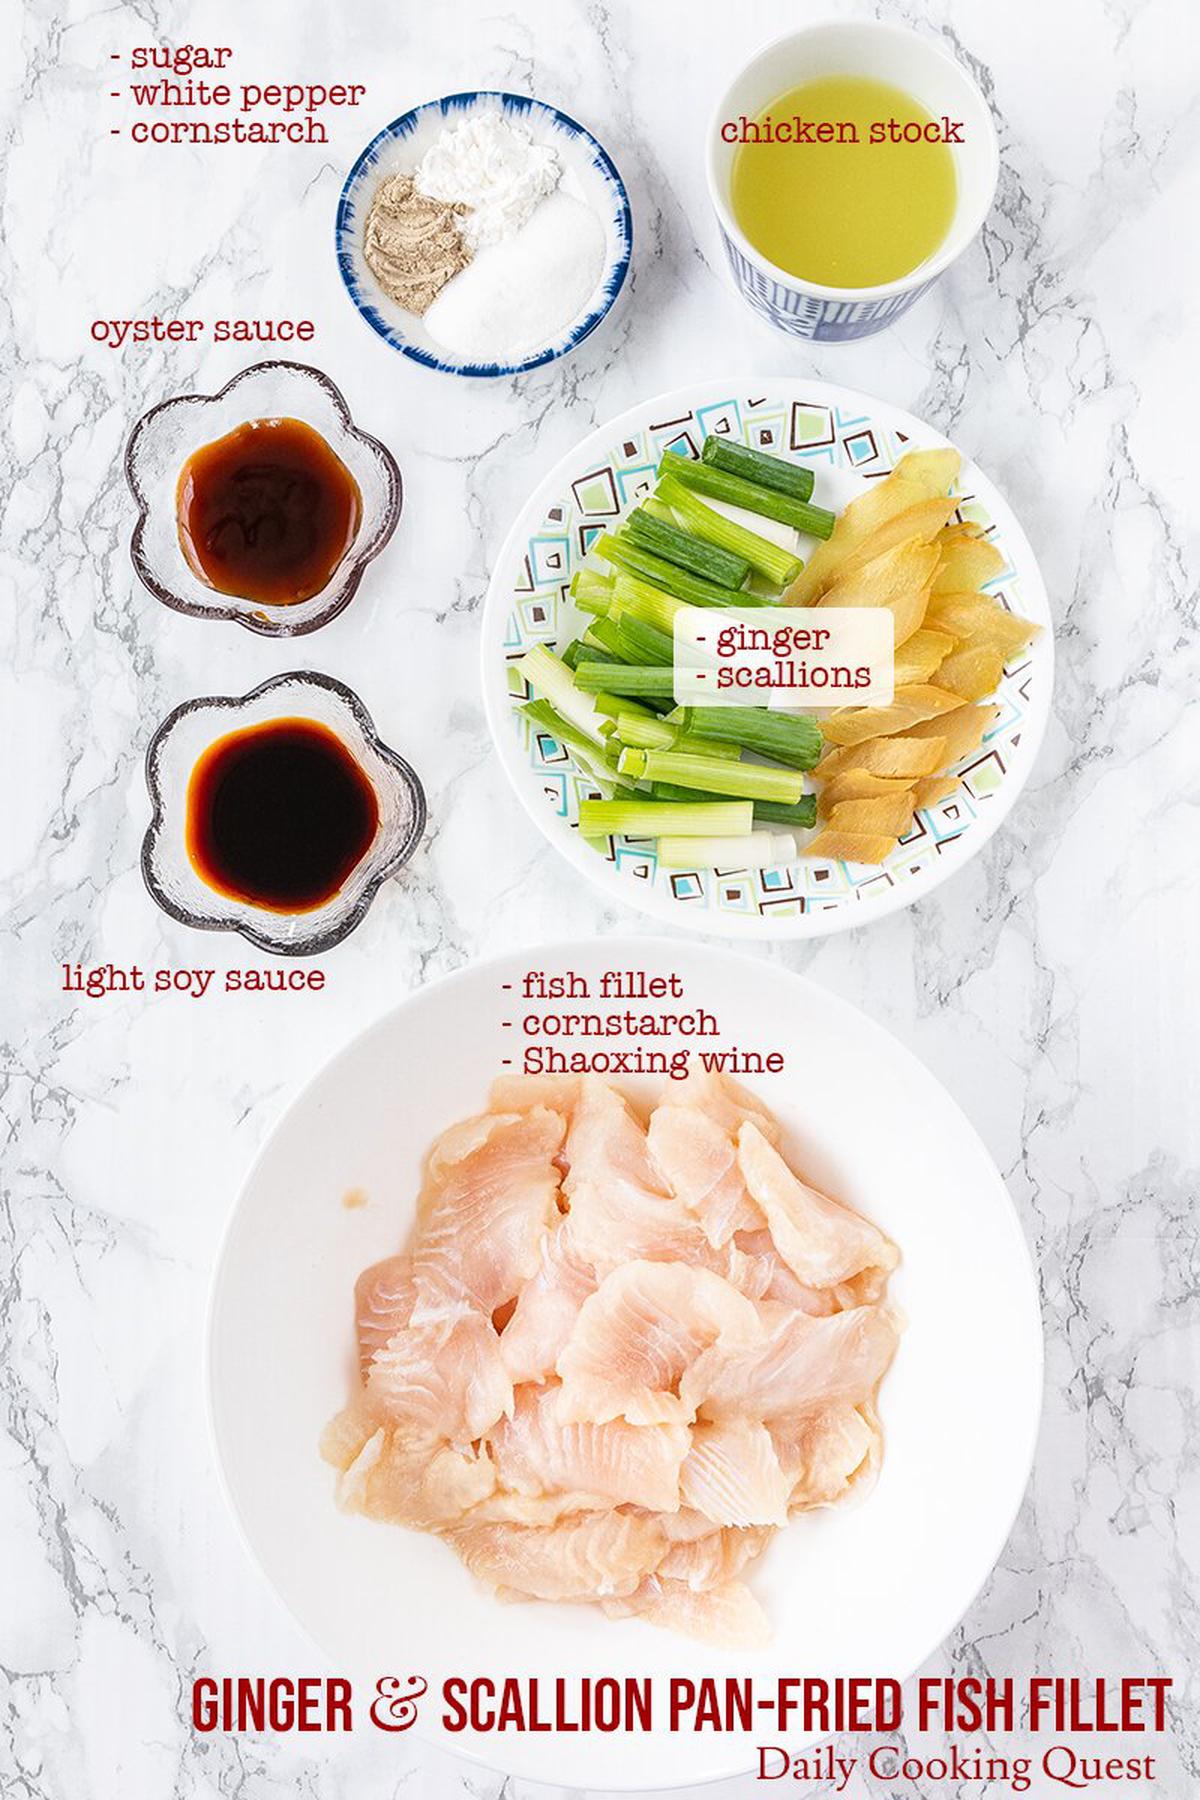 Ingredients for ginger and scallion pan-fried fish fillet: fish fillet, cornstarch, Shaoxing, ginger, scallions, light soy sauce, oyster sauce, chicken stock, sugar, and white pepper.